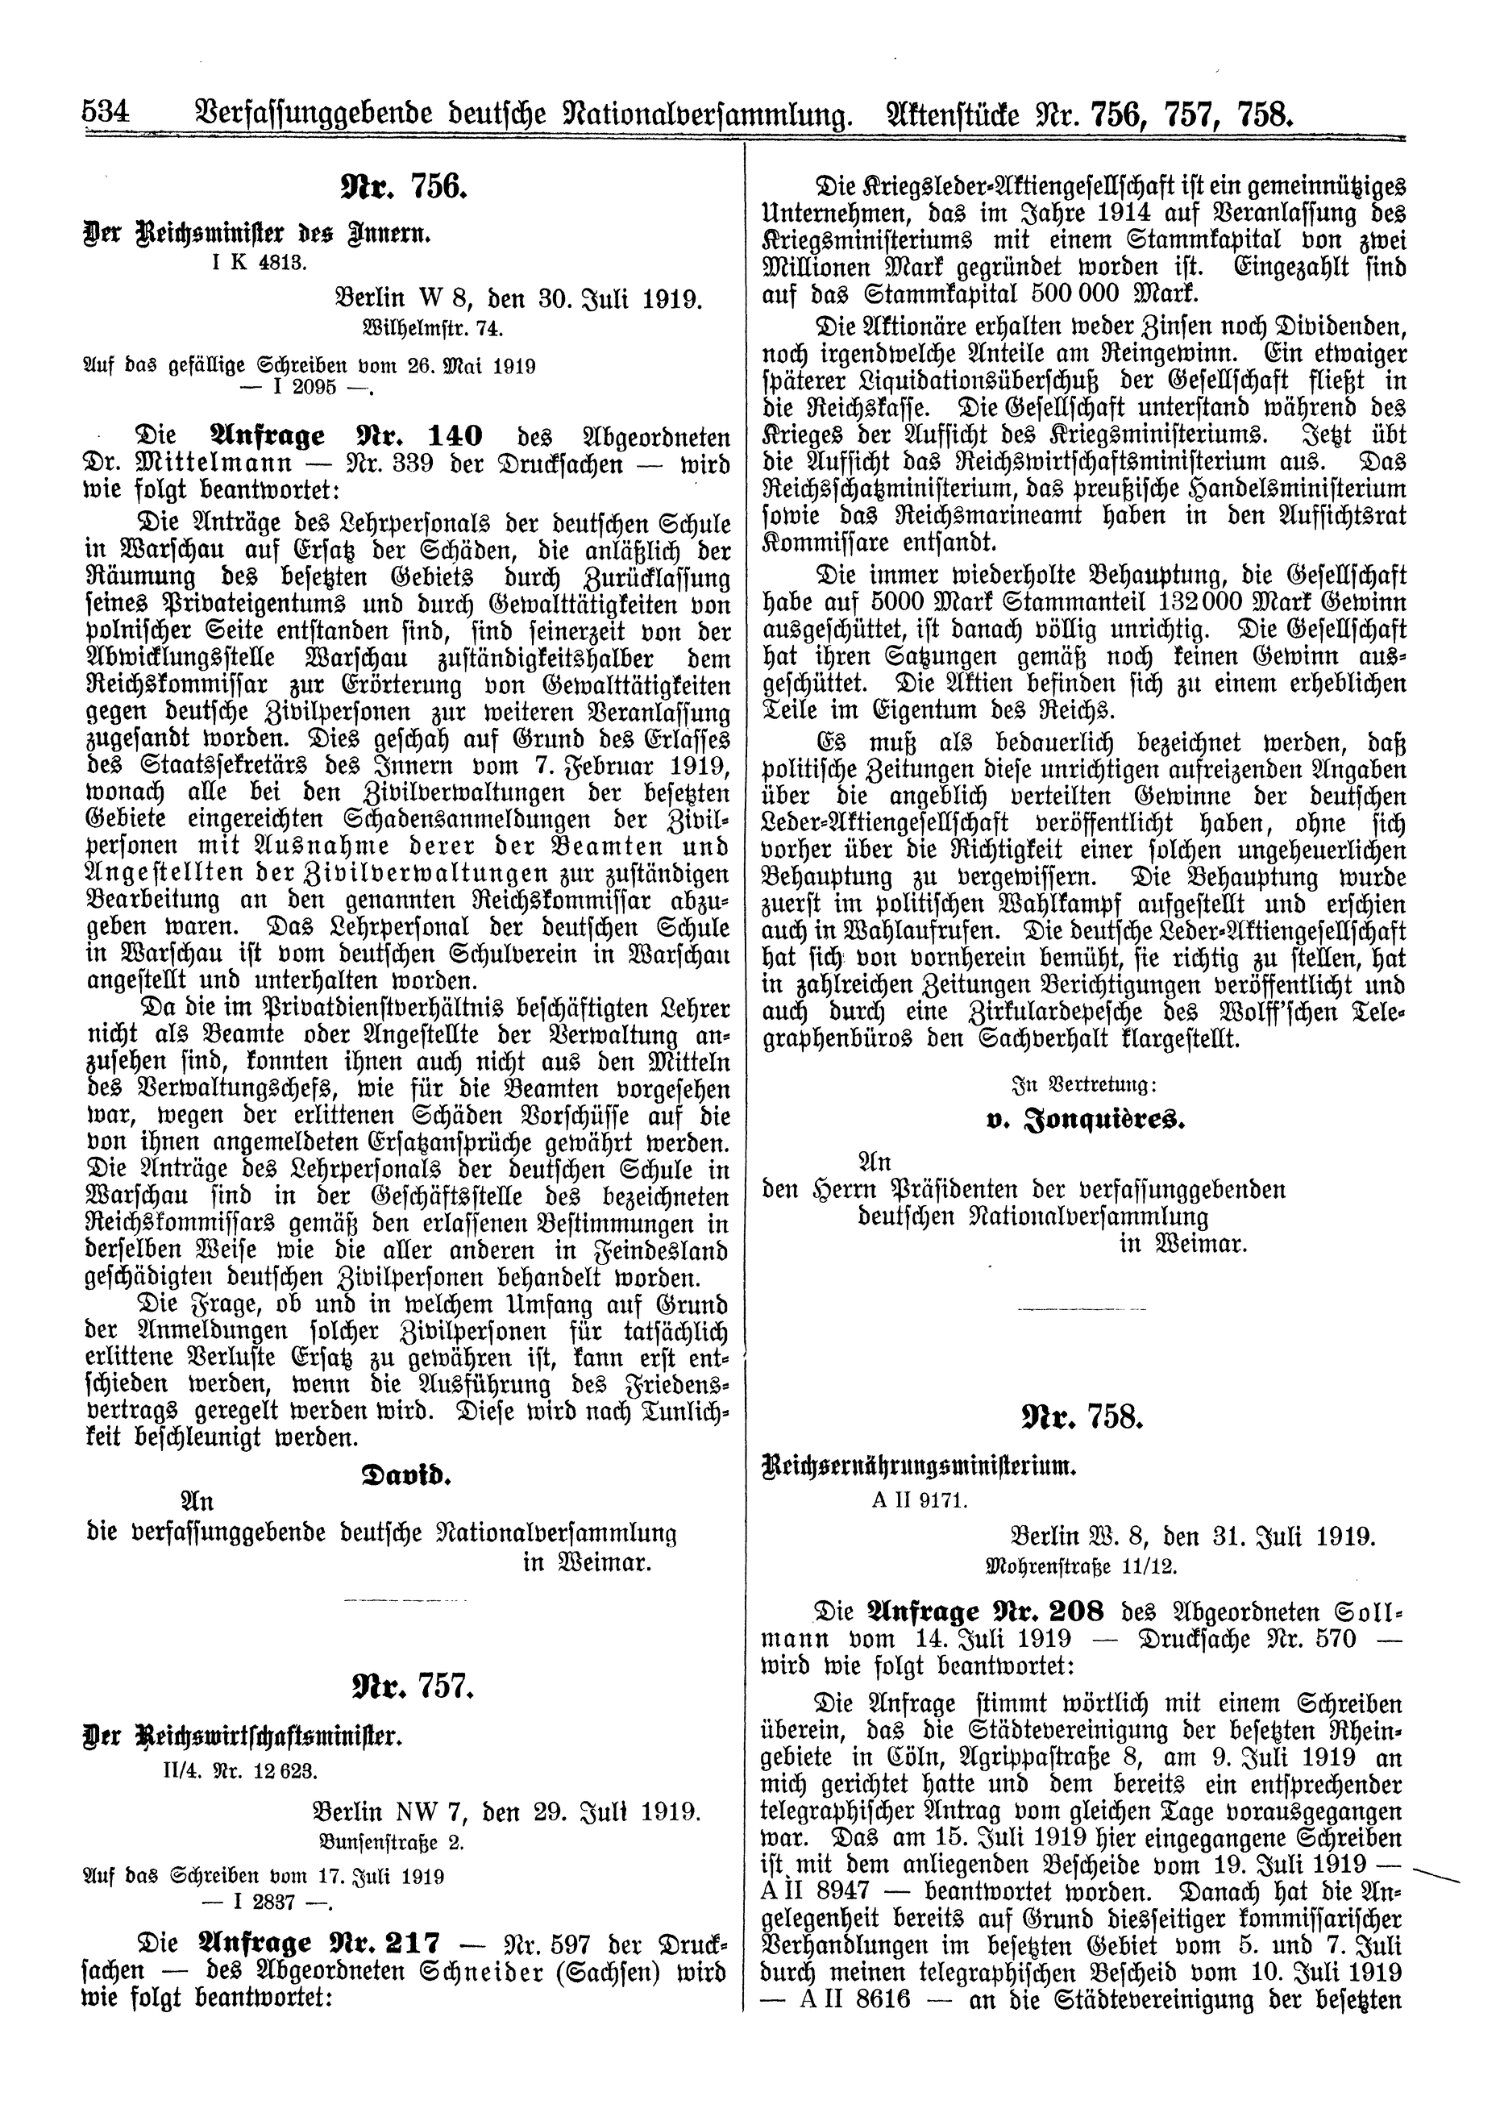 Scan of page 534